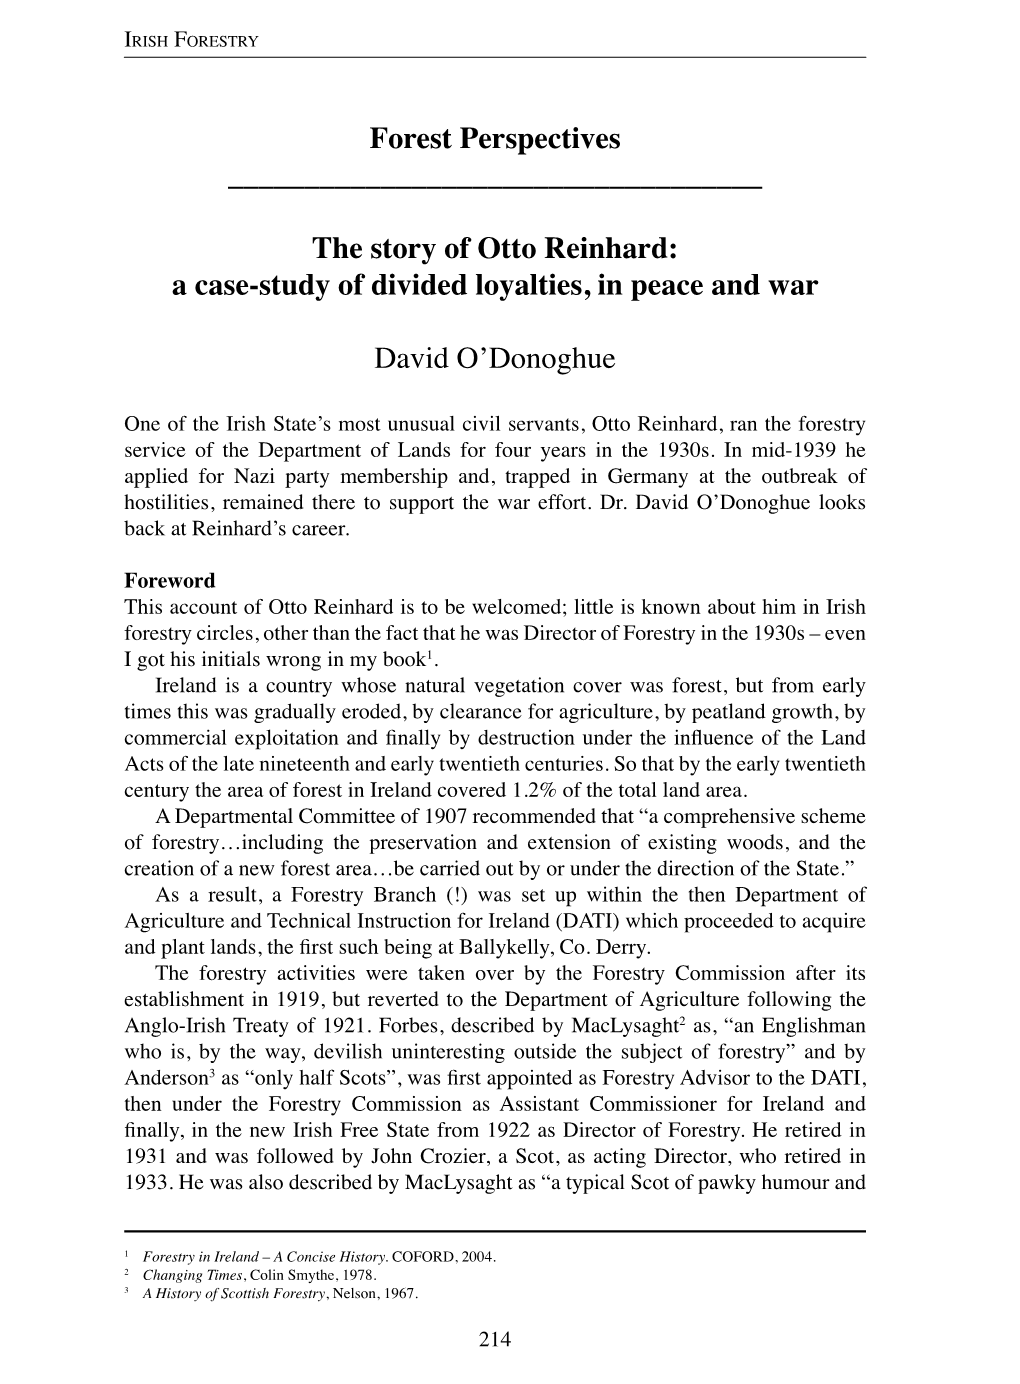 The Story of Otto Reinhard: a Case-Study of Divided Loyalties, in Peace and War